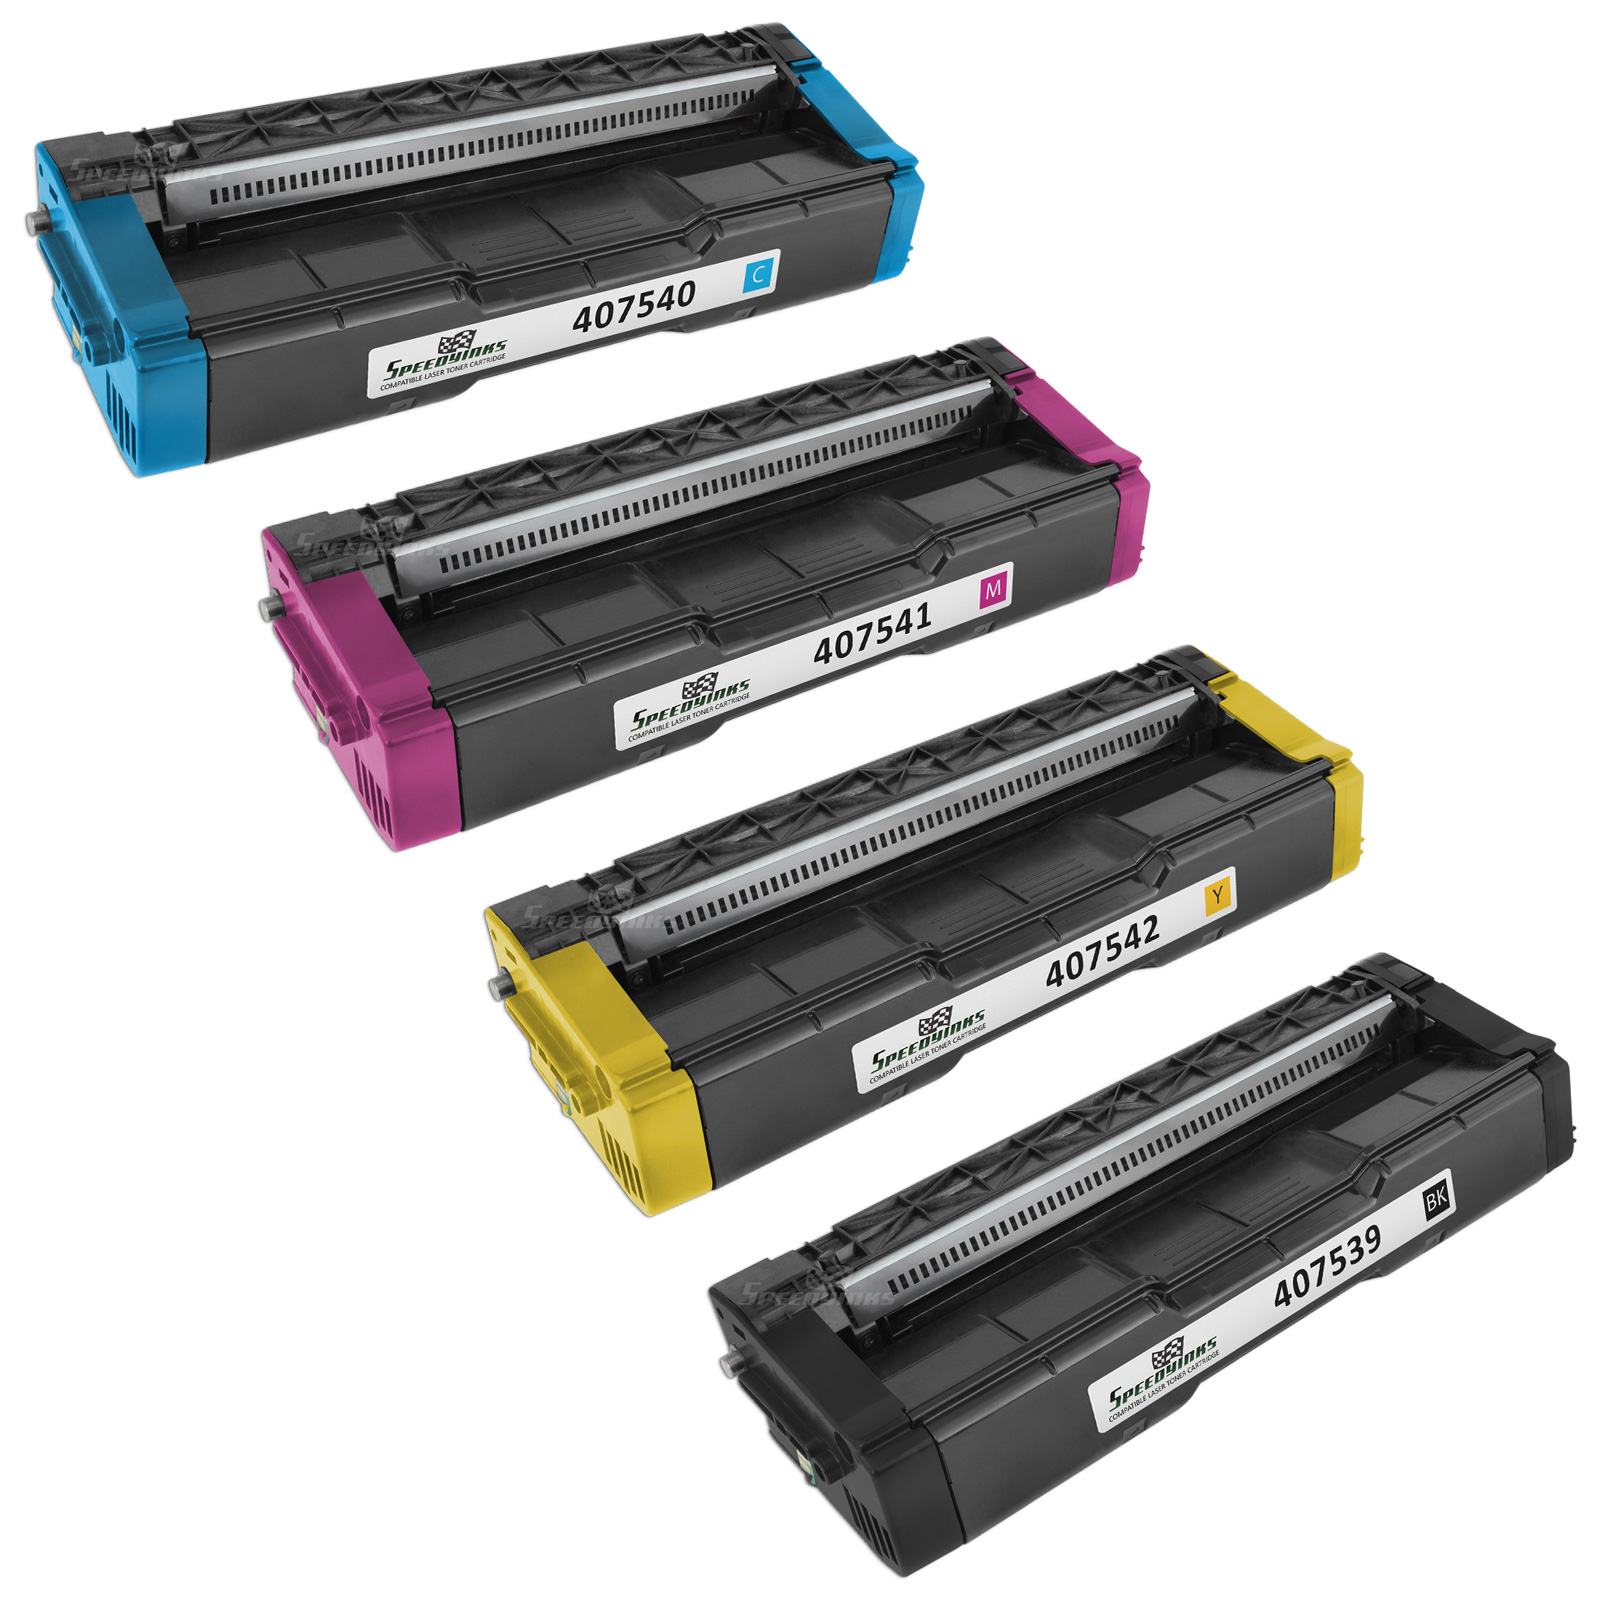 SpeedyInks - Compatible Ricoh SP C250A Toner Set 407539, 407540, 407541, 407542 for use in SP C250DN, SP C250SF - image 4 of 4